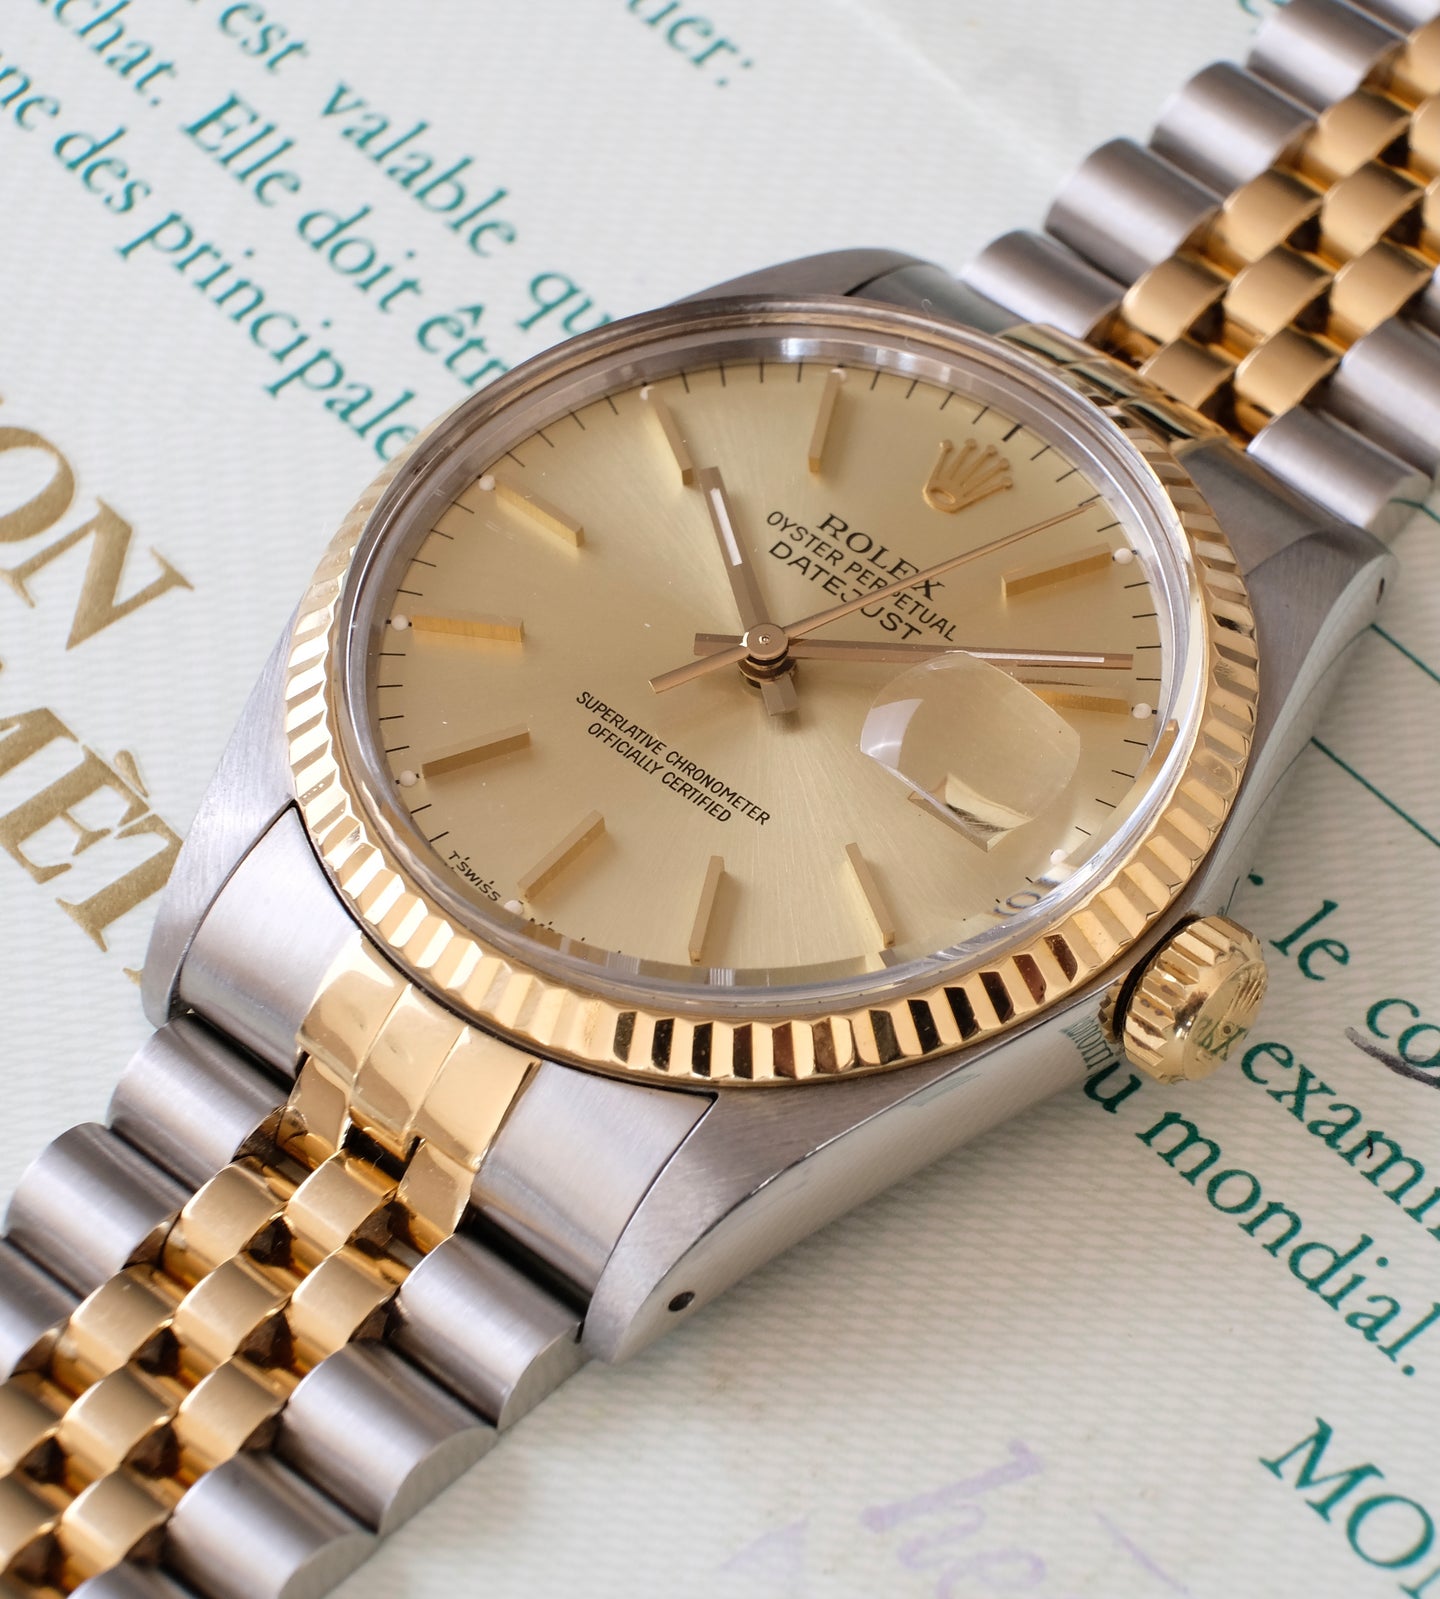 Rolex Datejust 16013 (Box + Papers) 1985